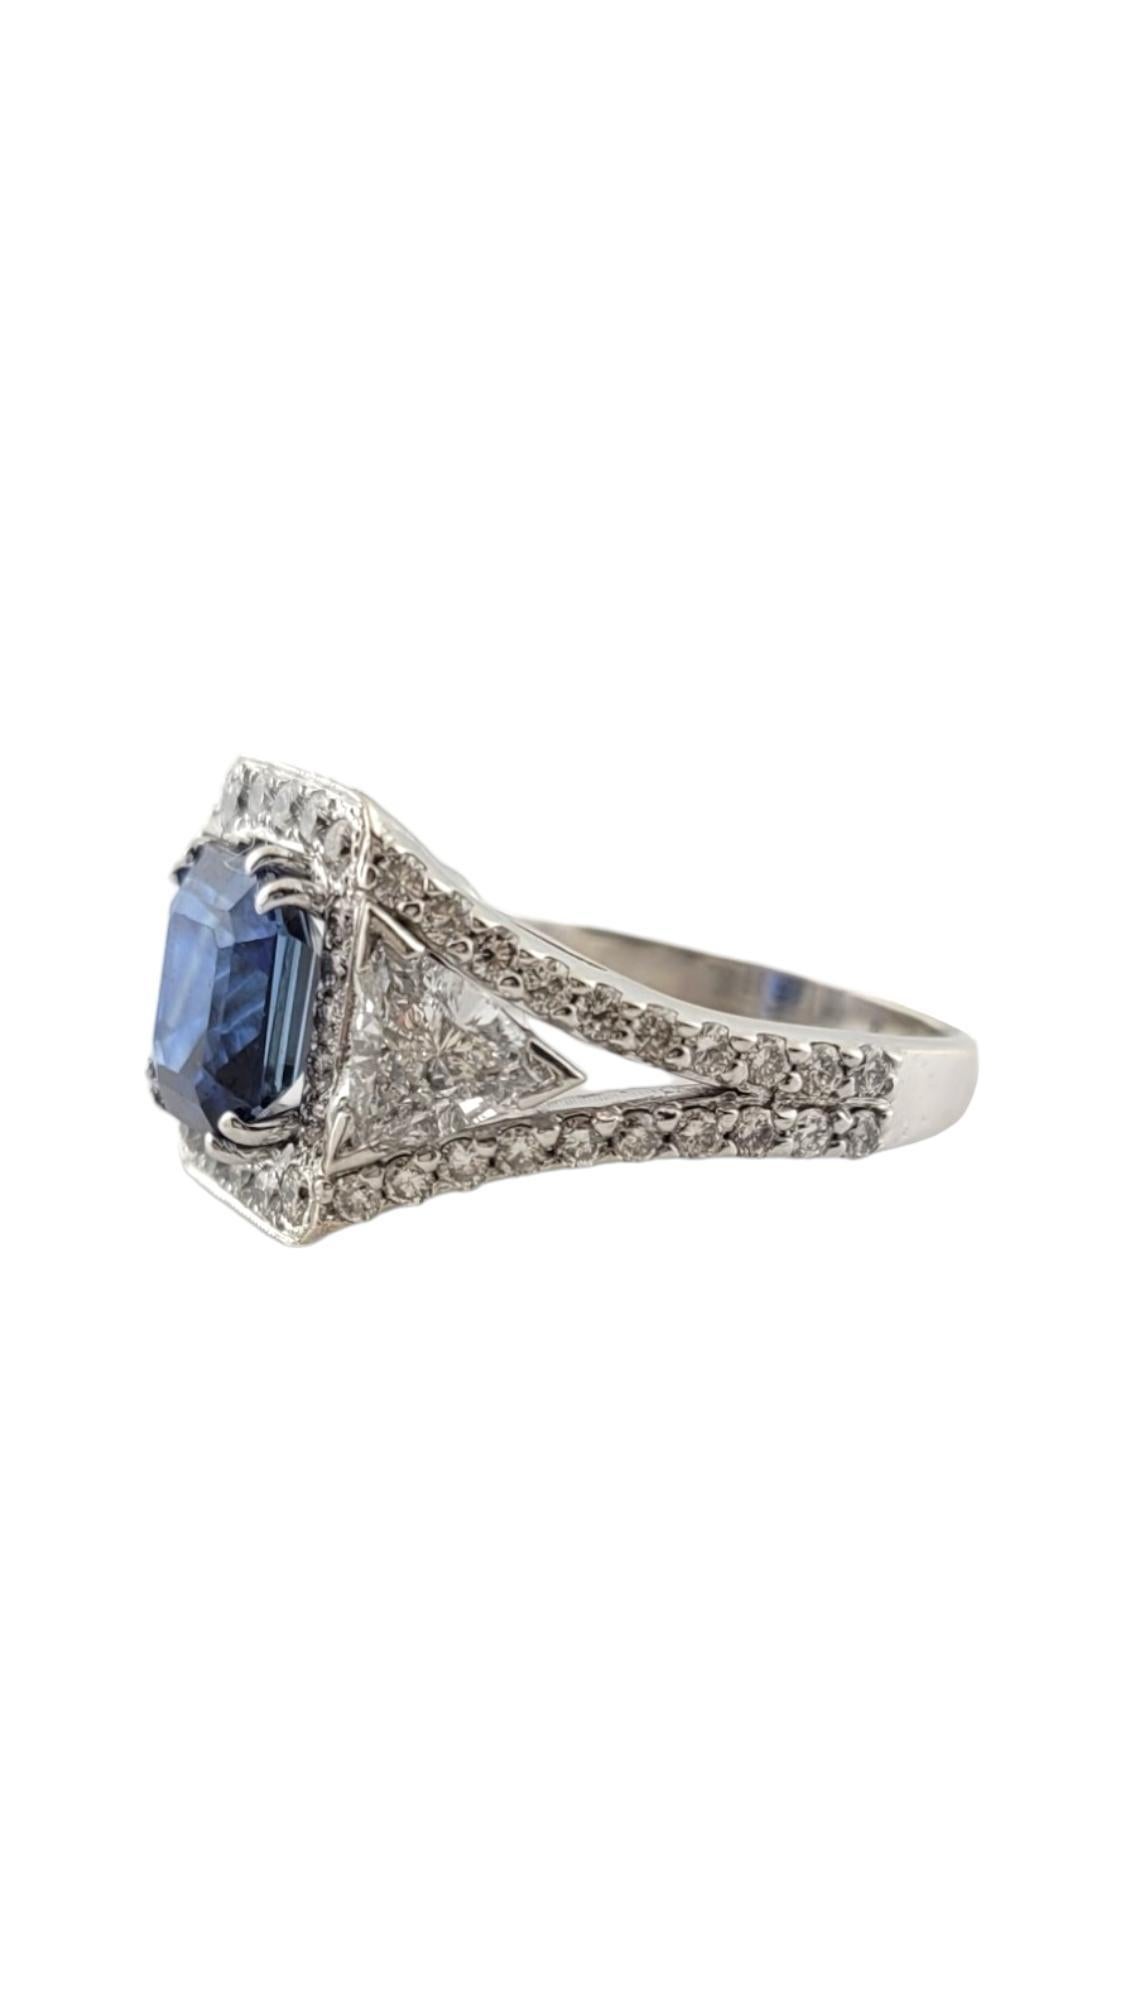 Vintage 14K White Gold Diamond and Sapphire Engagement Ring Size 8.25

This gorgeous, halo design ring features one square emerald cut natural blue sapphire with 80 sparkling diamonds (78 round cut & 2 trillion cut)!

Approximate total diamond